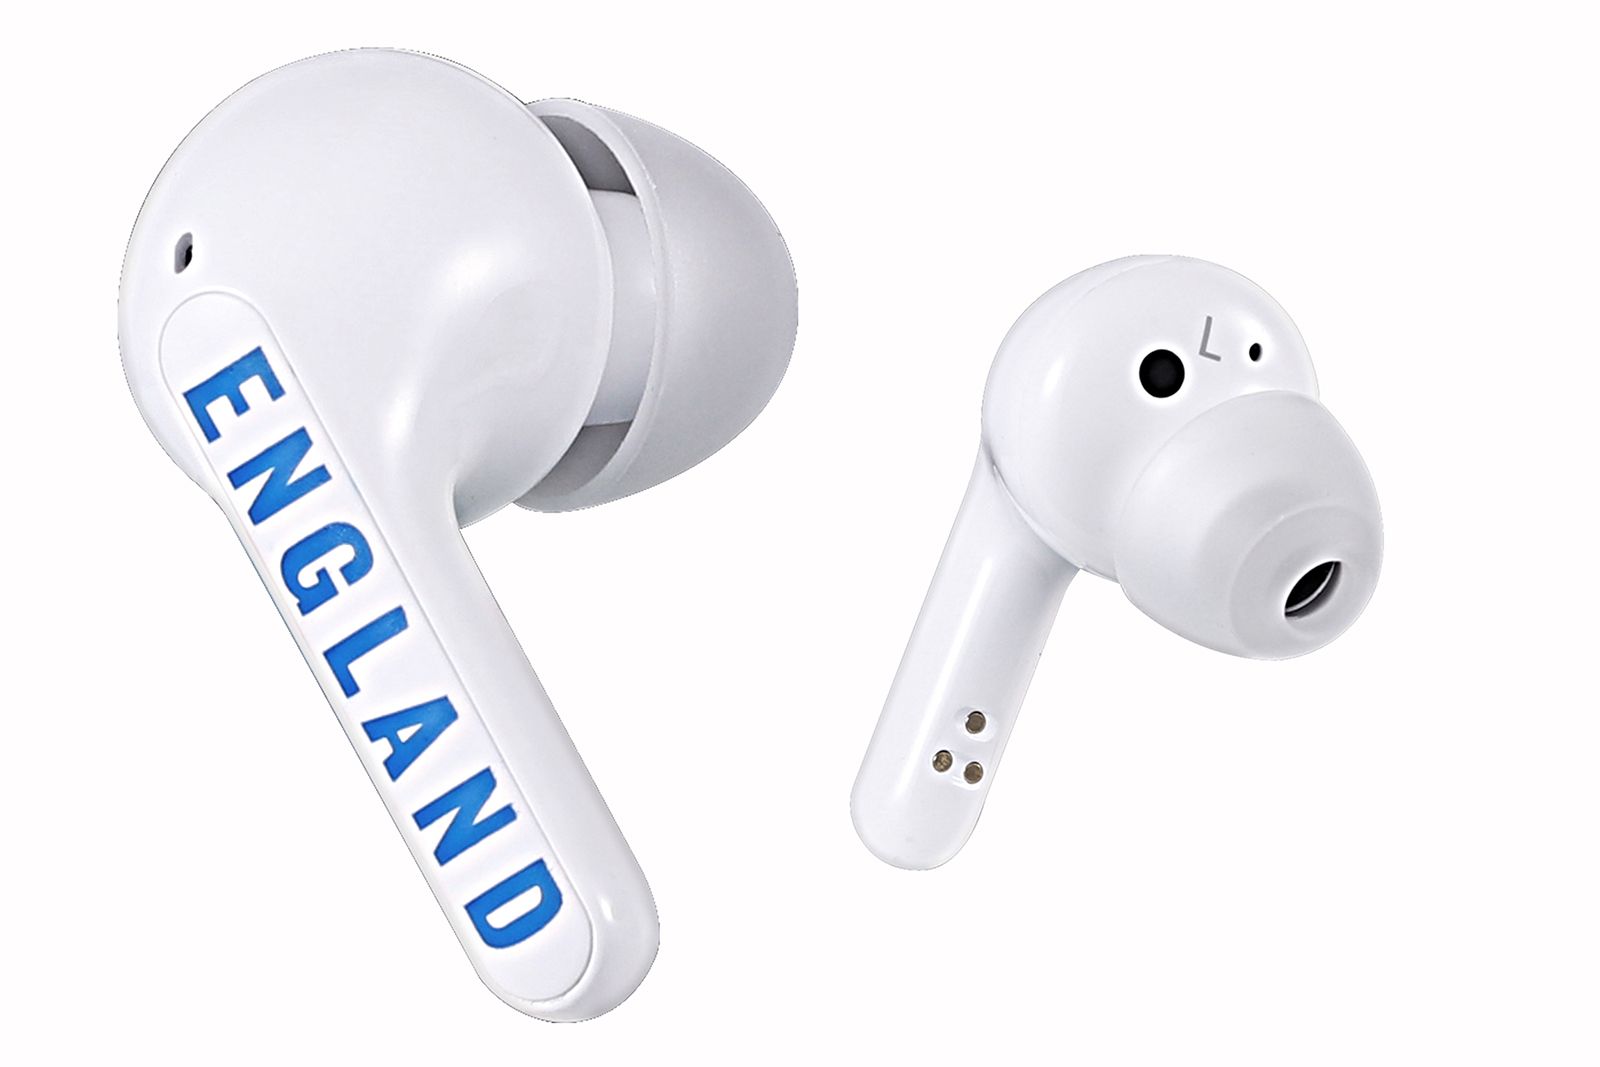 Official England LG FA4 Tone Free TWS earbuds available ahead of Euro 2020 photo 2